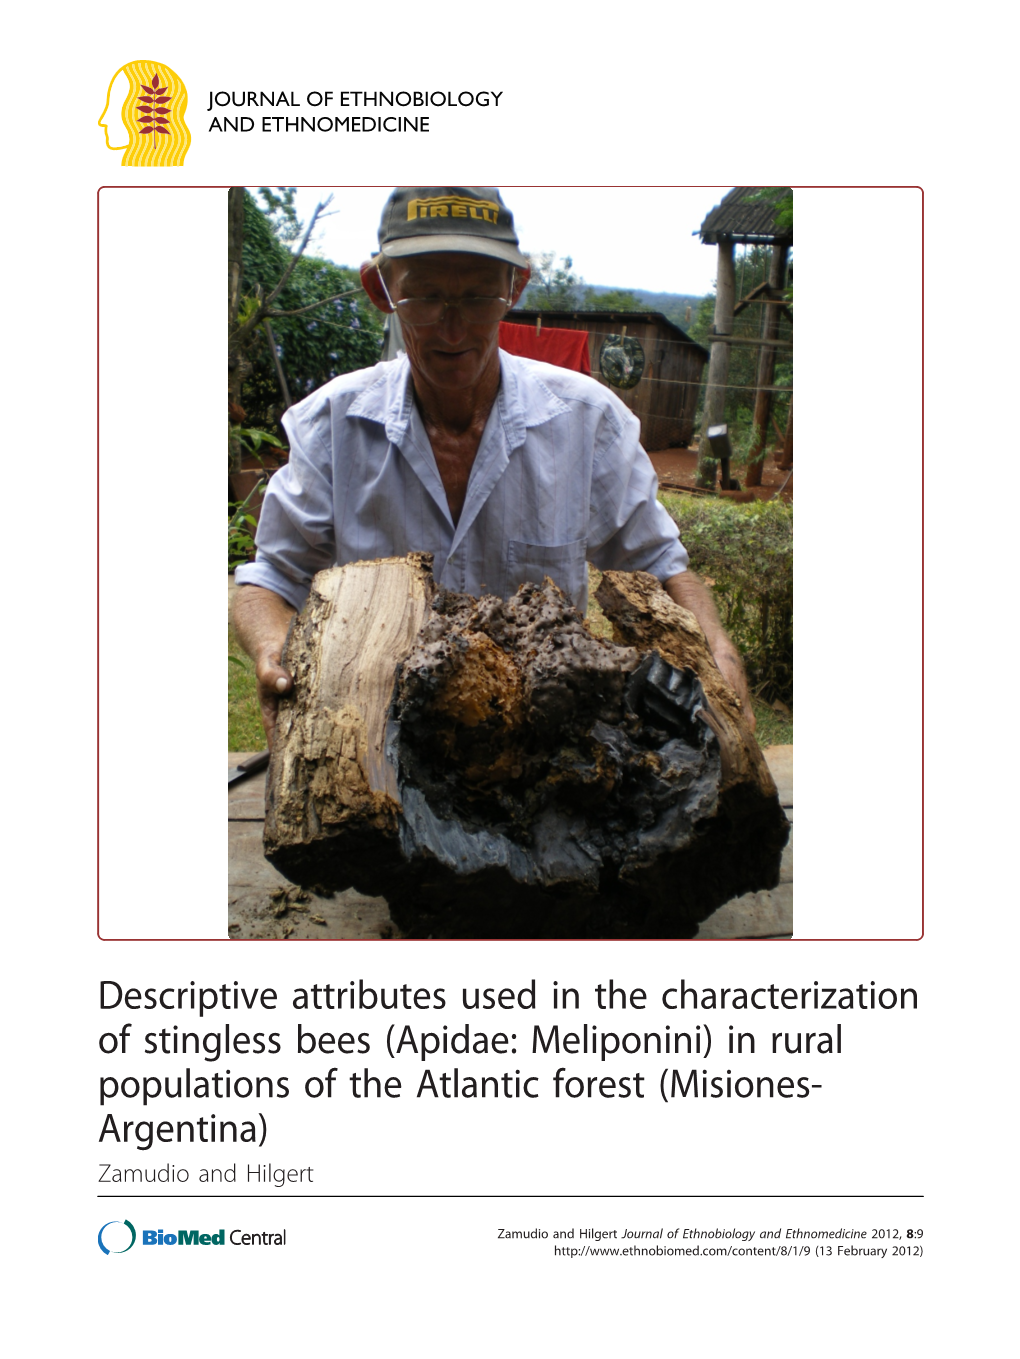 Descriptive Attributes Used in the Characterization of Stingless Bees